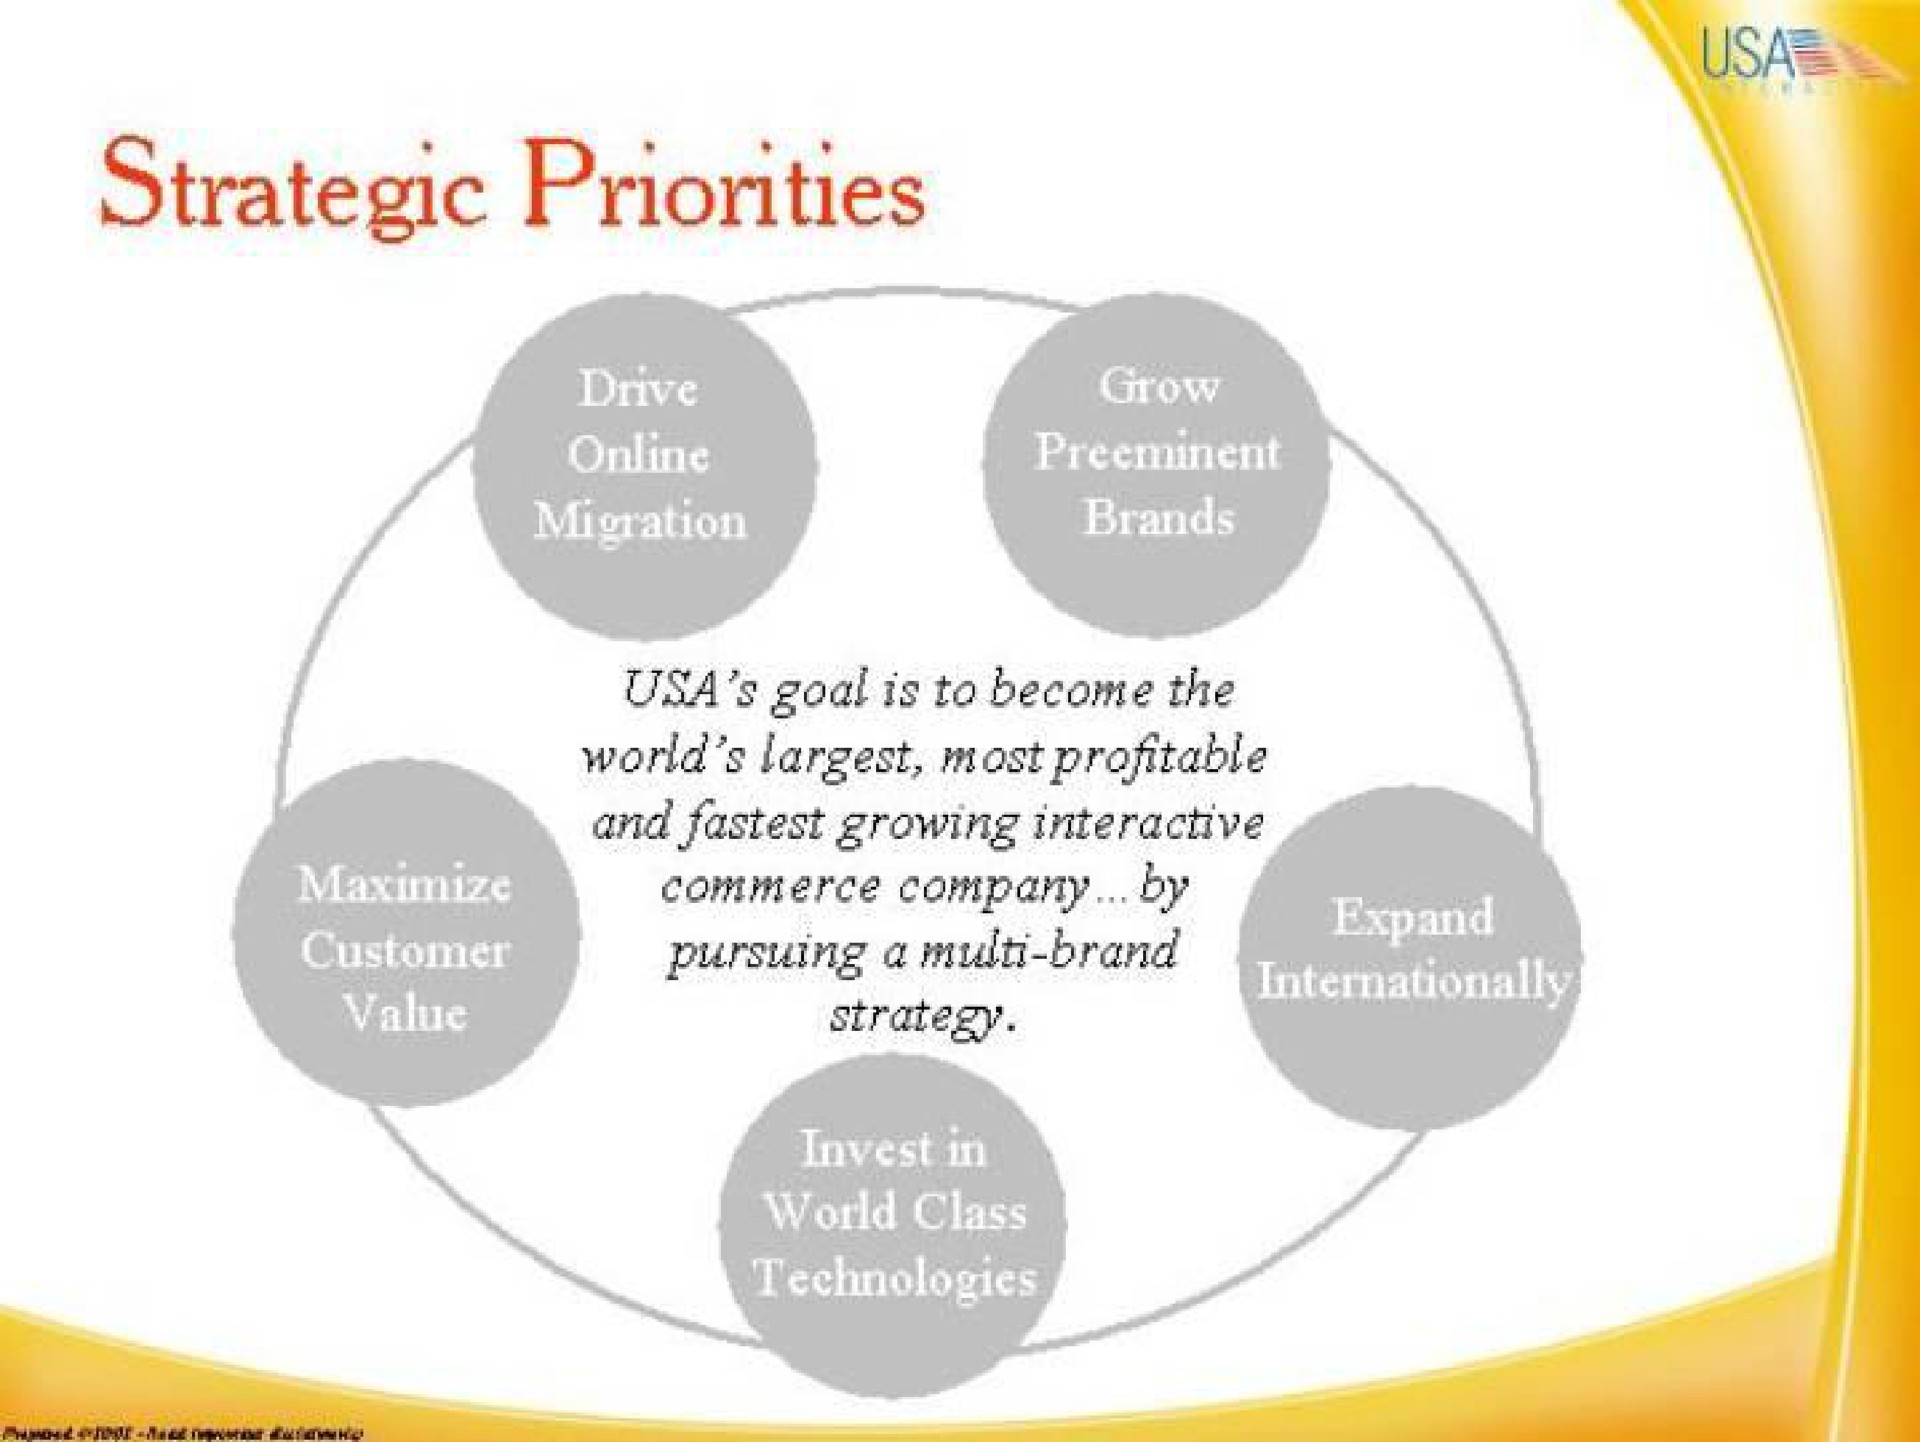 strategic priorities wee sence goal is to become the world most profitable and growing interactive pursuing a brand | IAC